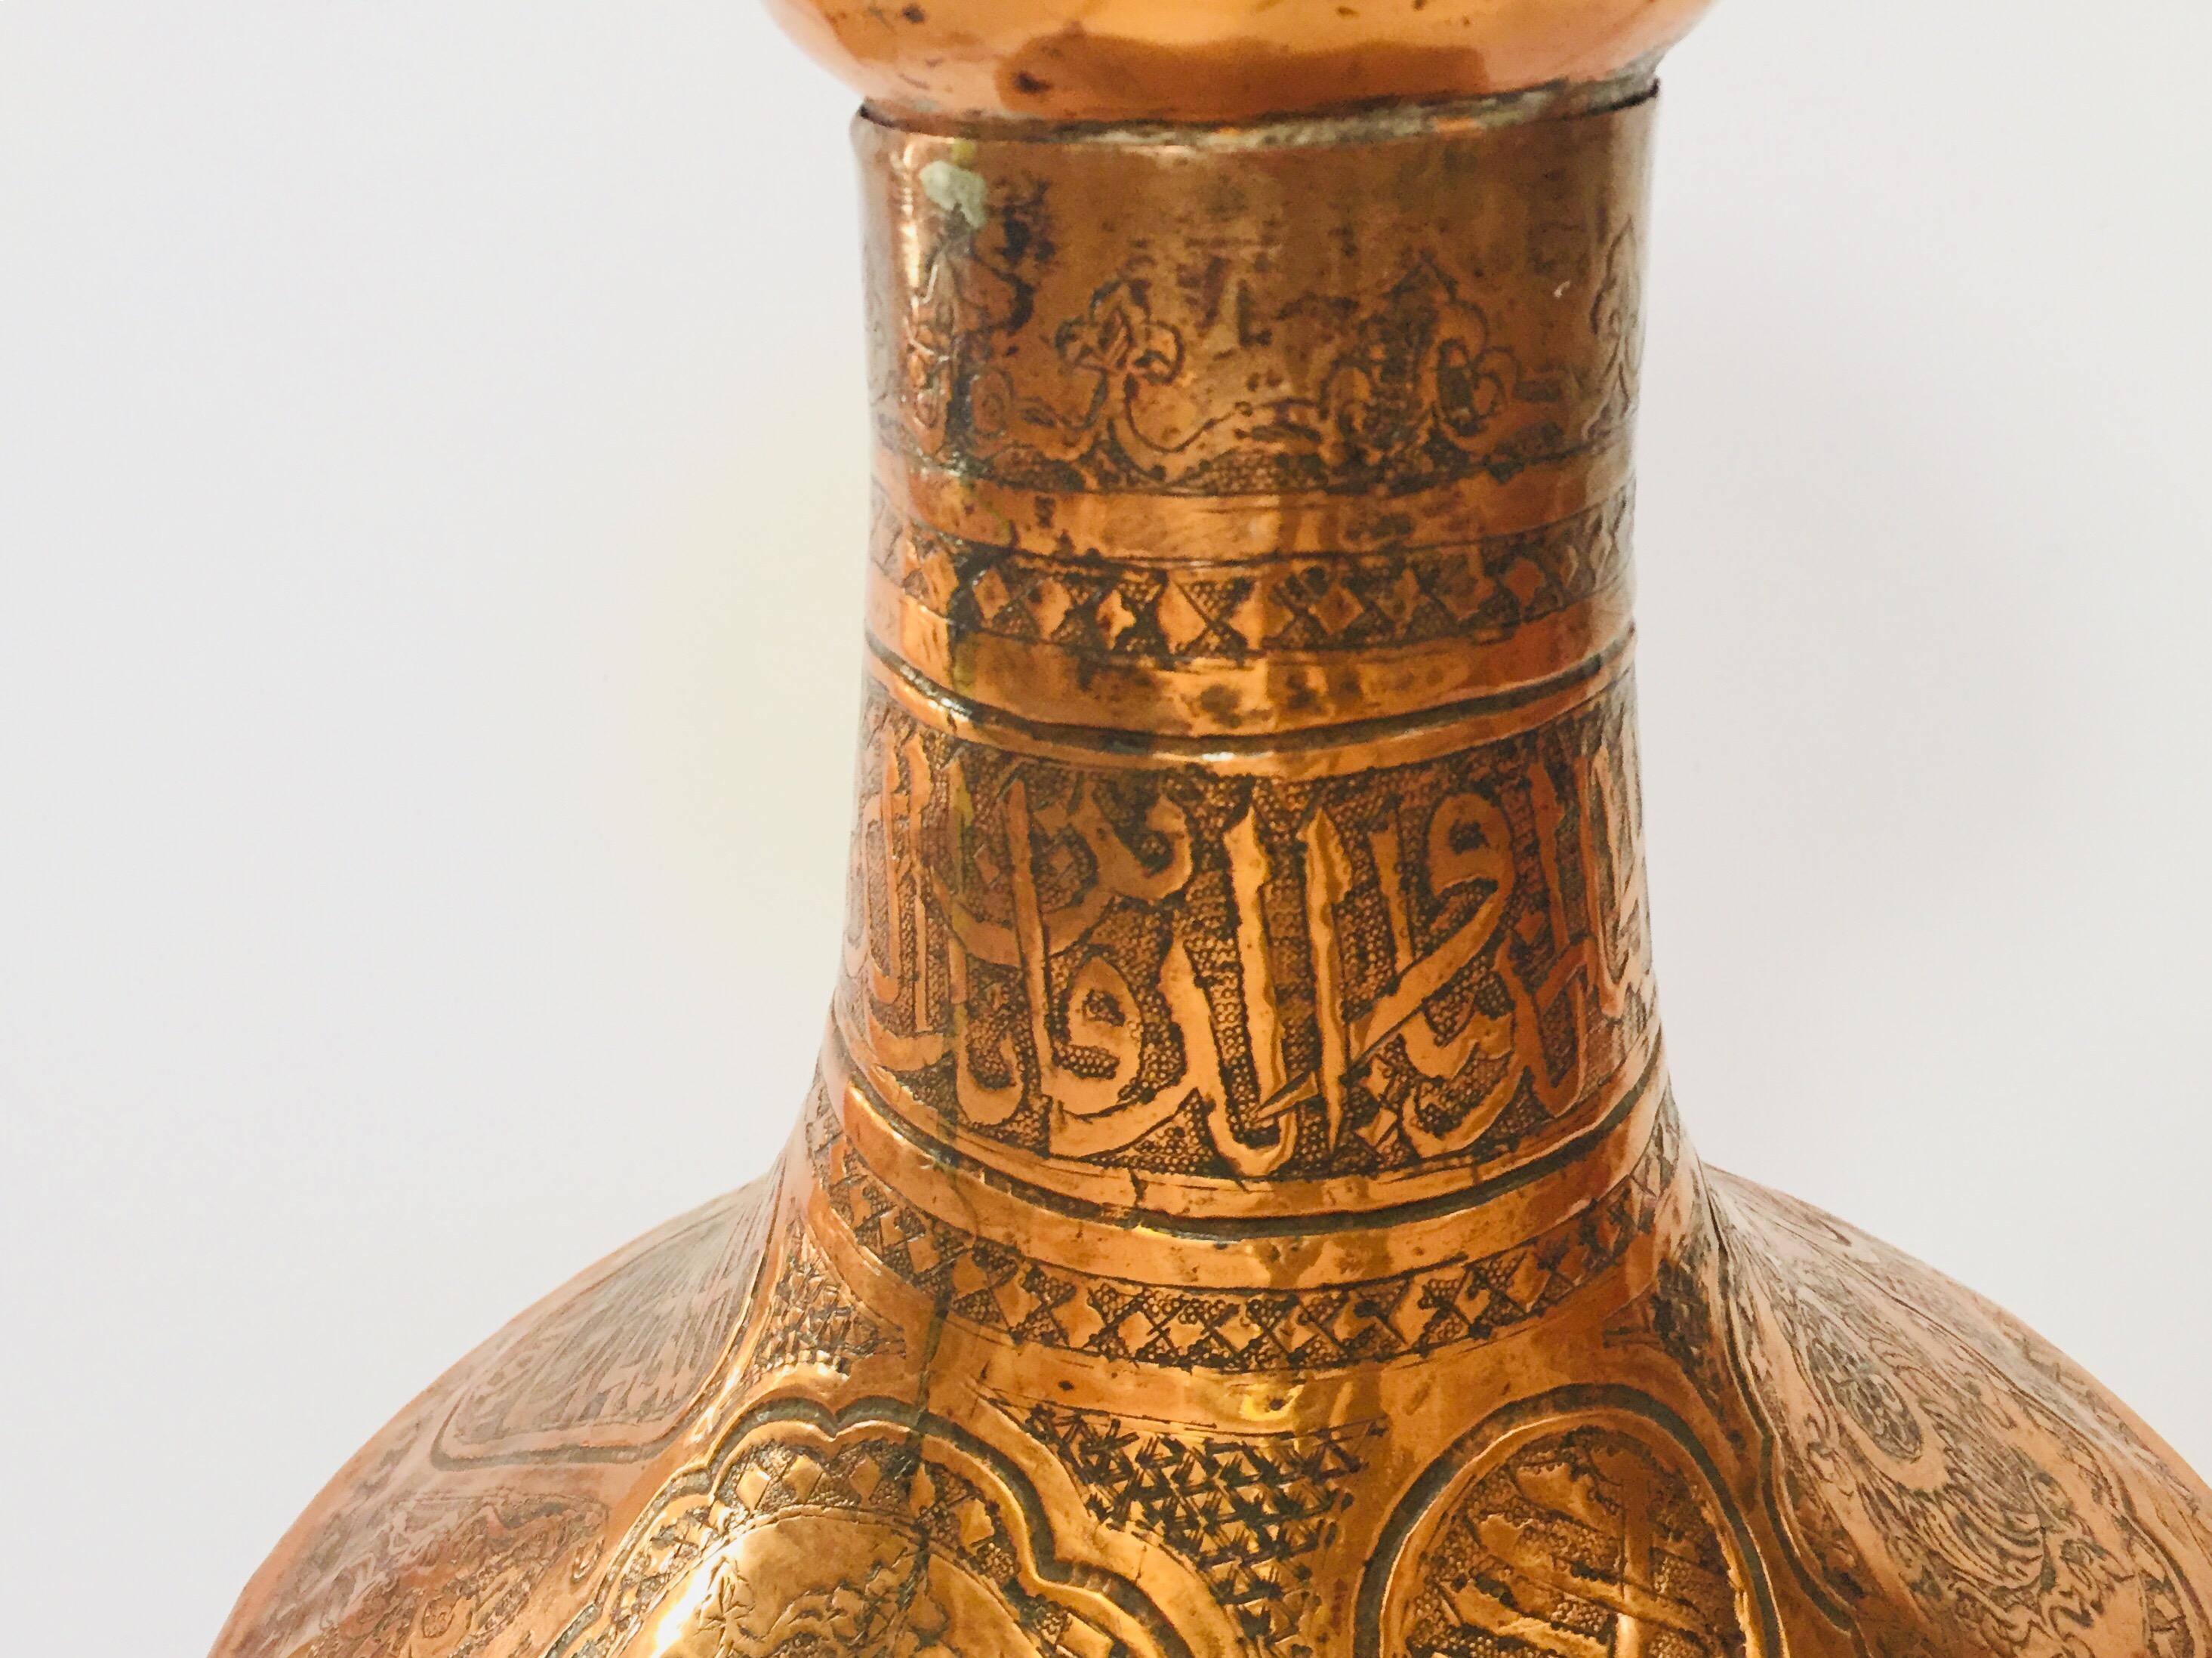 Middle Eastern Syrian Copper Islamic Art Vase Engraved with Arabic Calligraphy 7